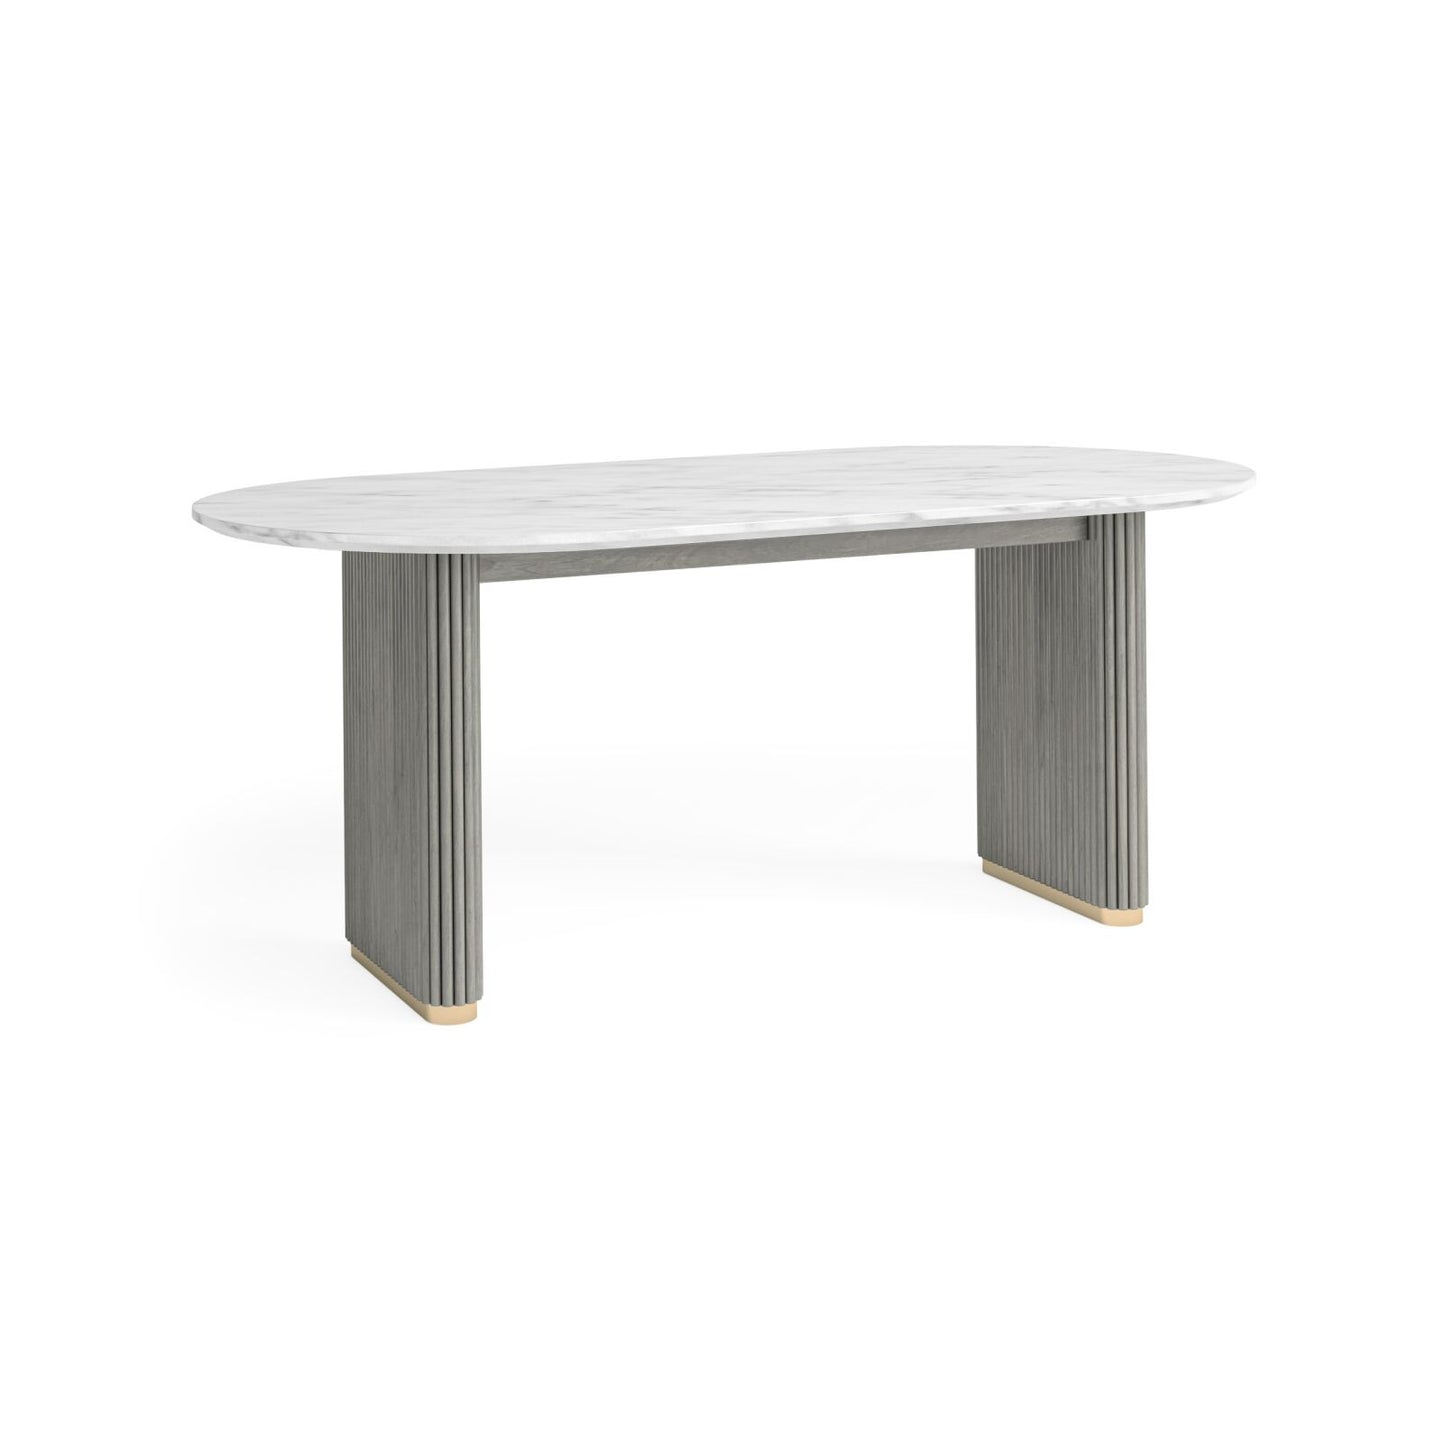 Isabella Oval Dining Table - Marble Top